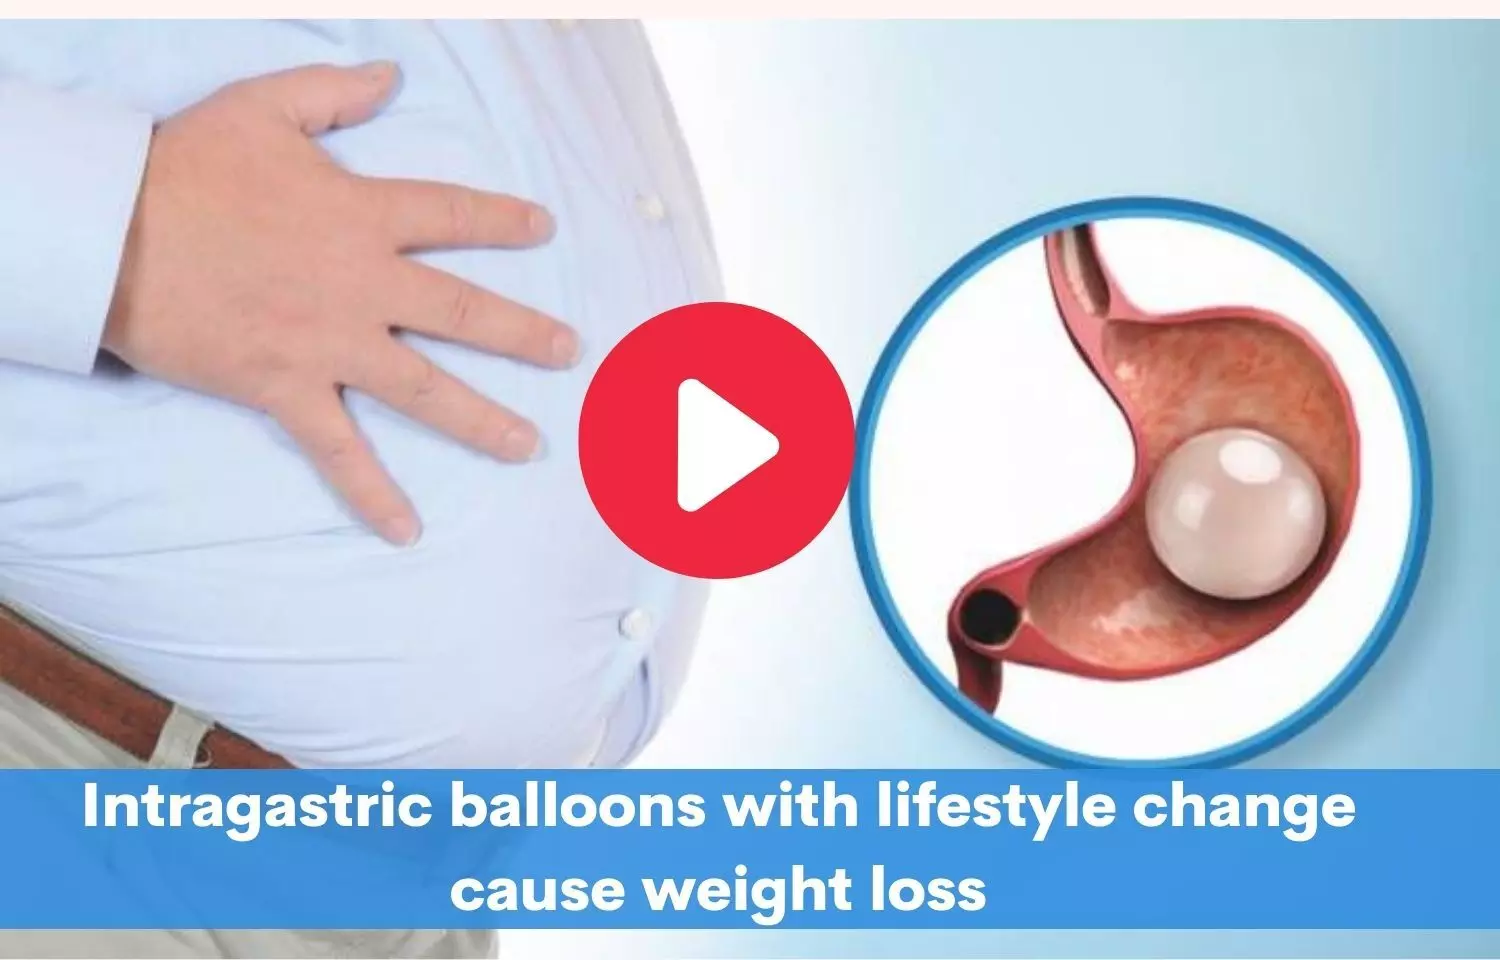 Intragastric balloons combined with lifestyle modifications can help control weight